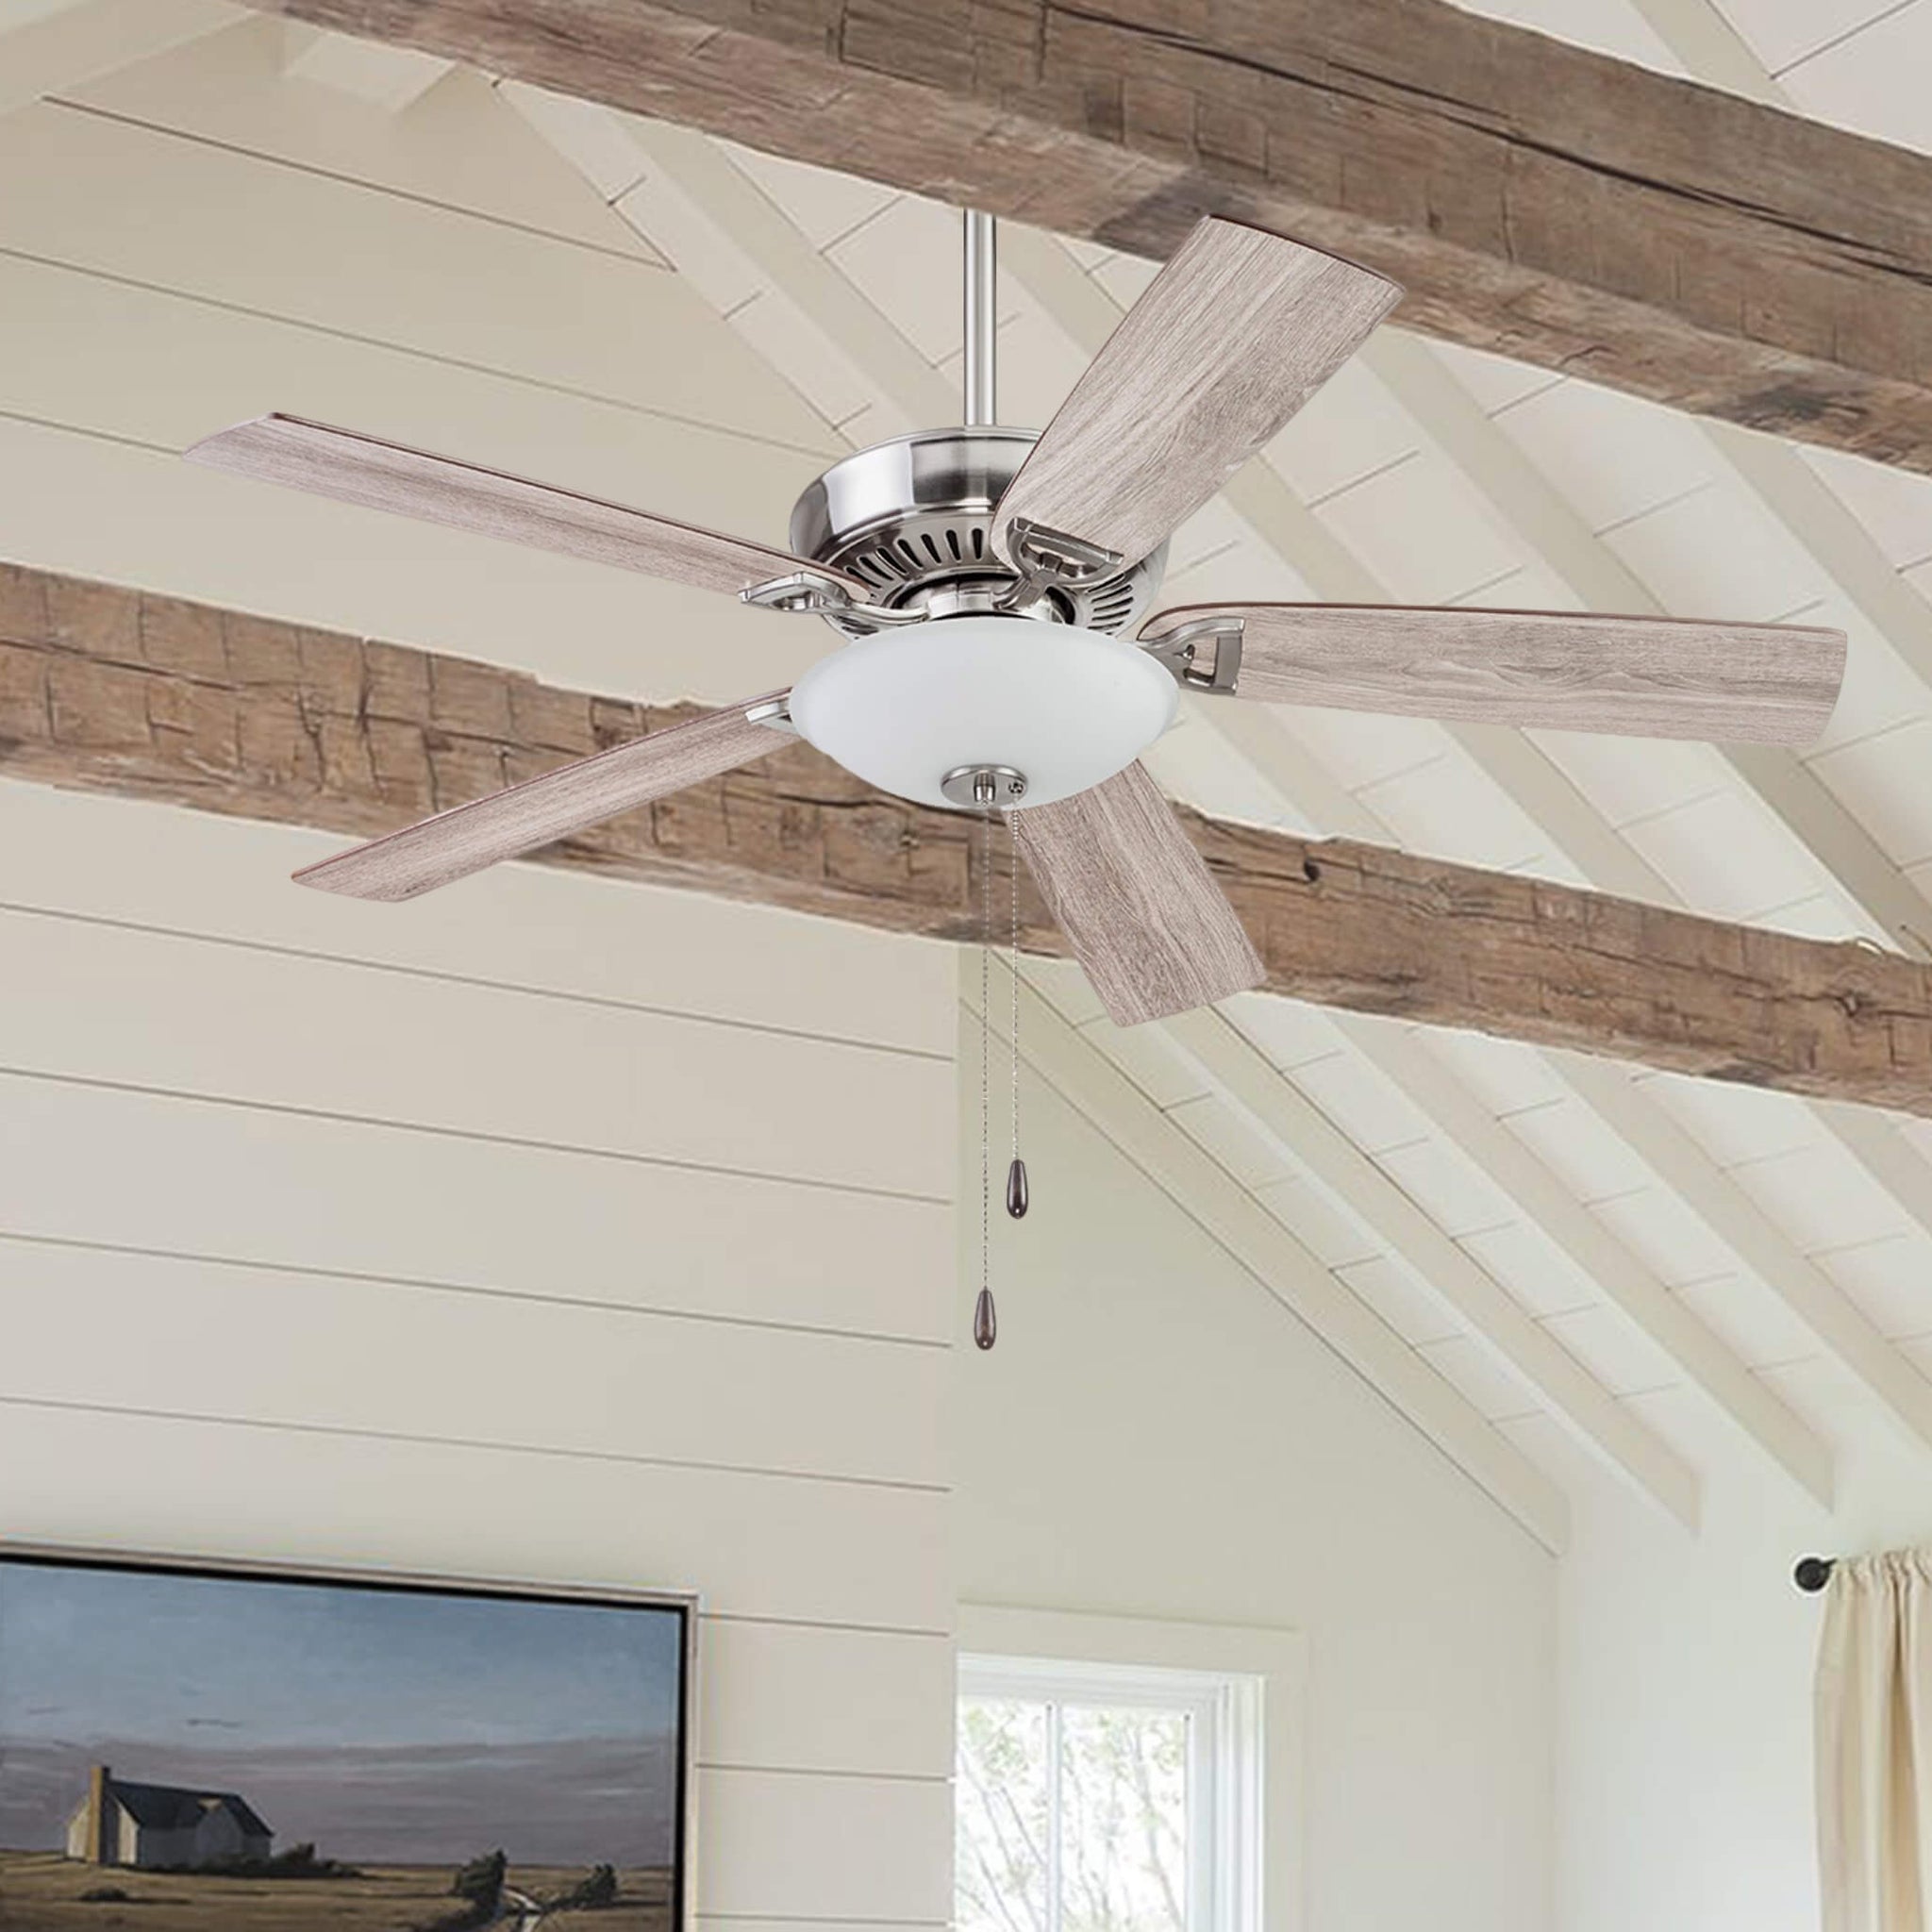 52 Inch Montlake Brushed Nickel, Pull Chain, Ceiling Fan by Prominence Home